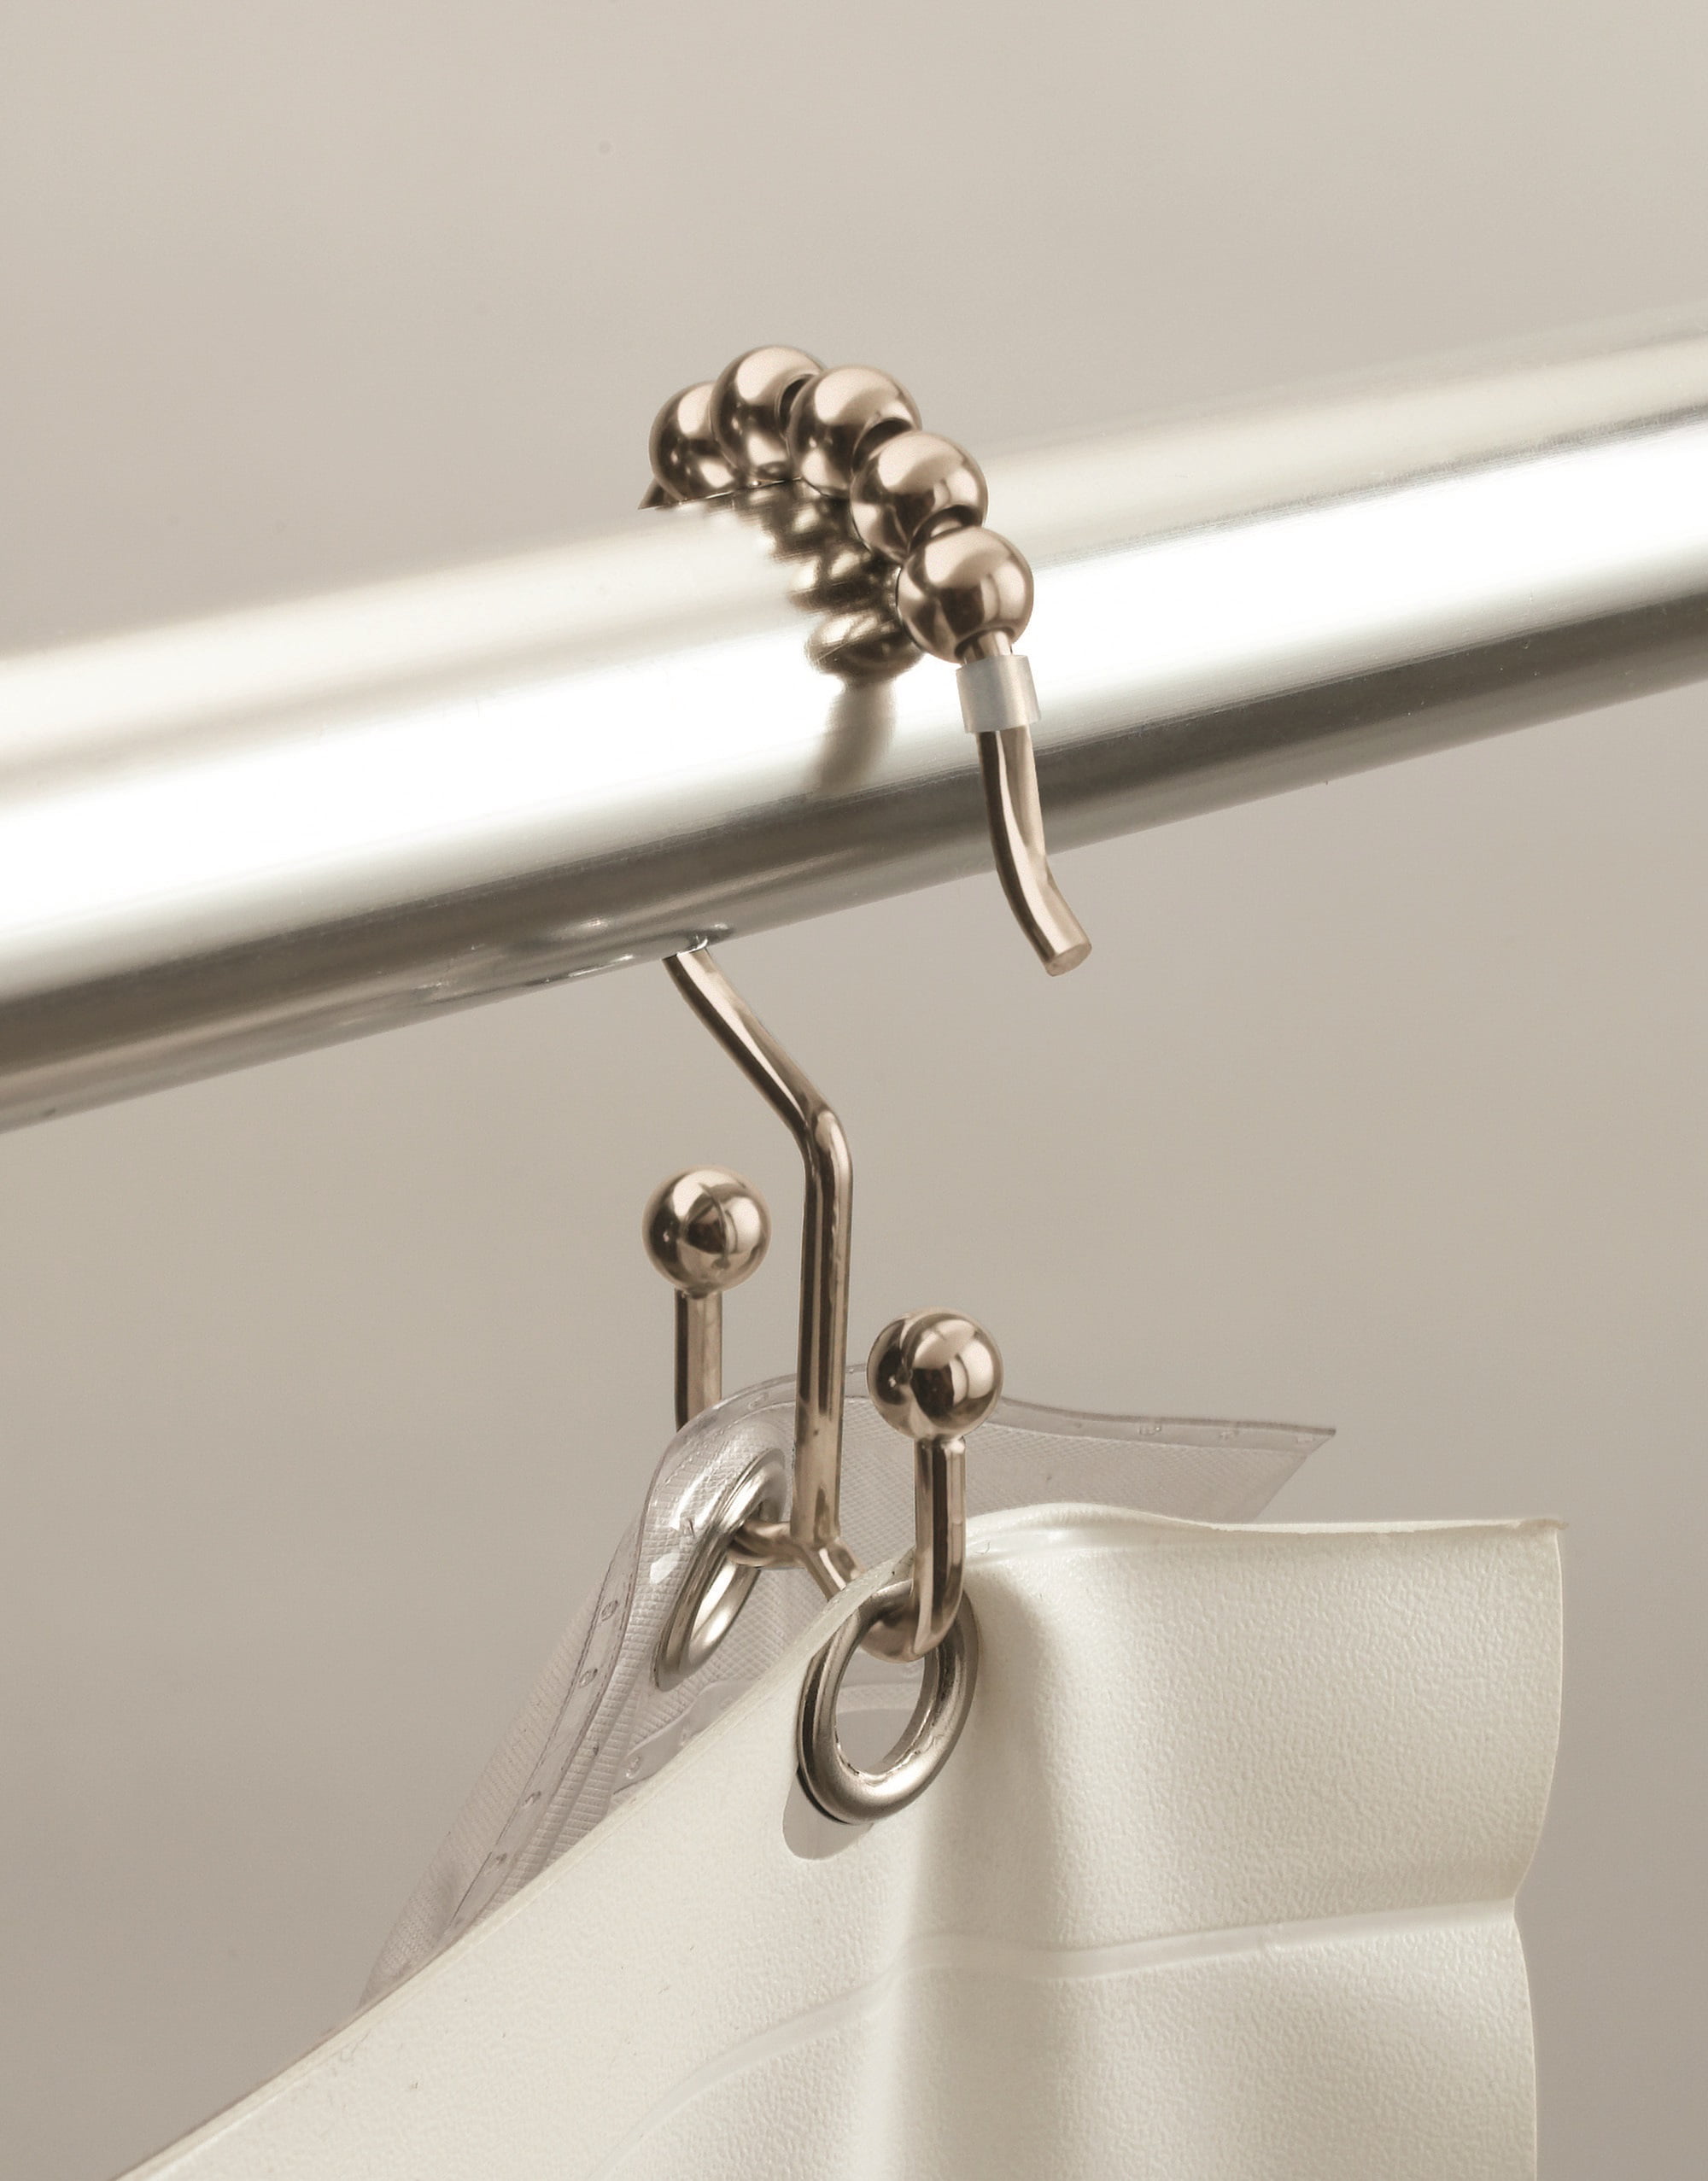 Details about   Better Homes & Garden Chrome Rollerball Double Shower Curtain Hooks Set of 12 